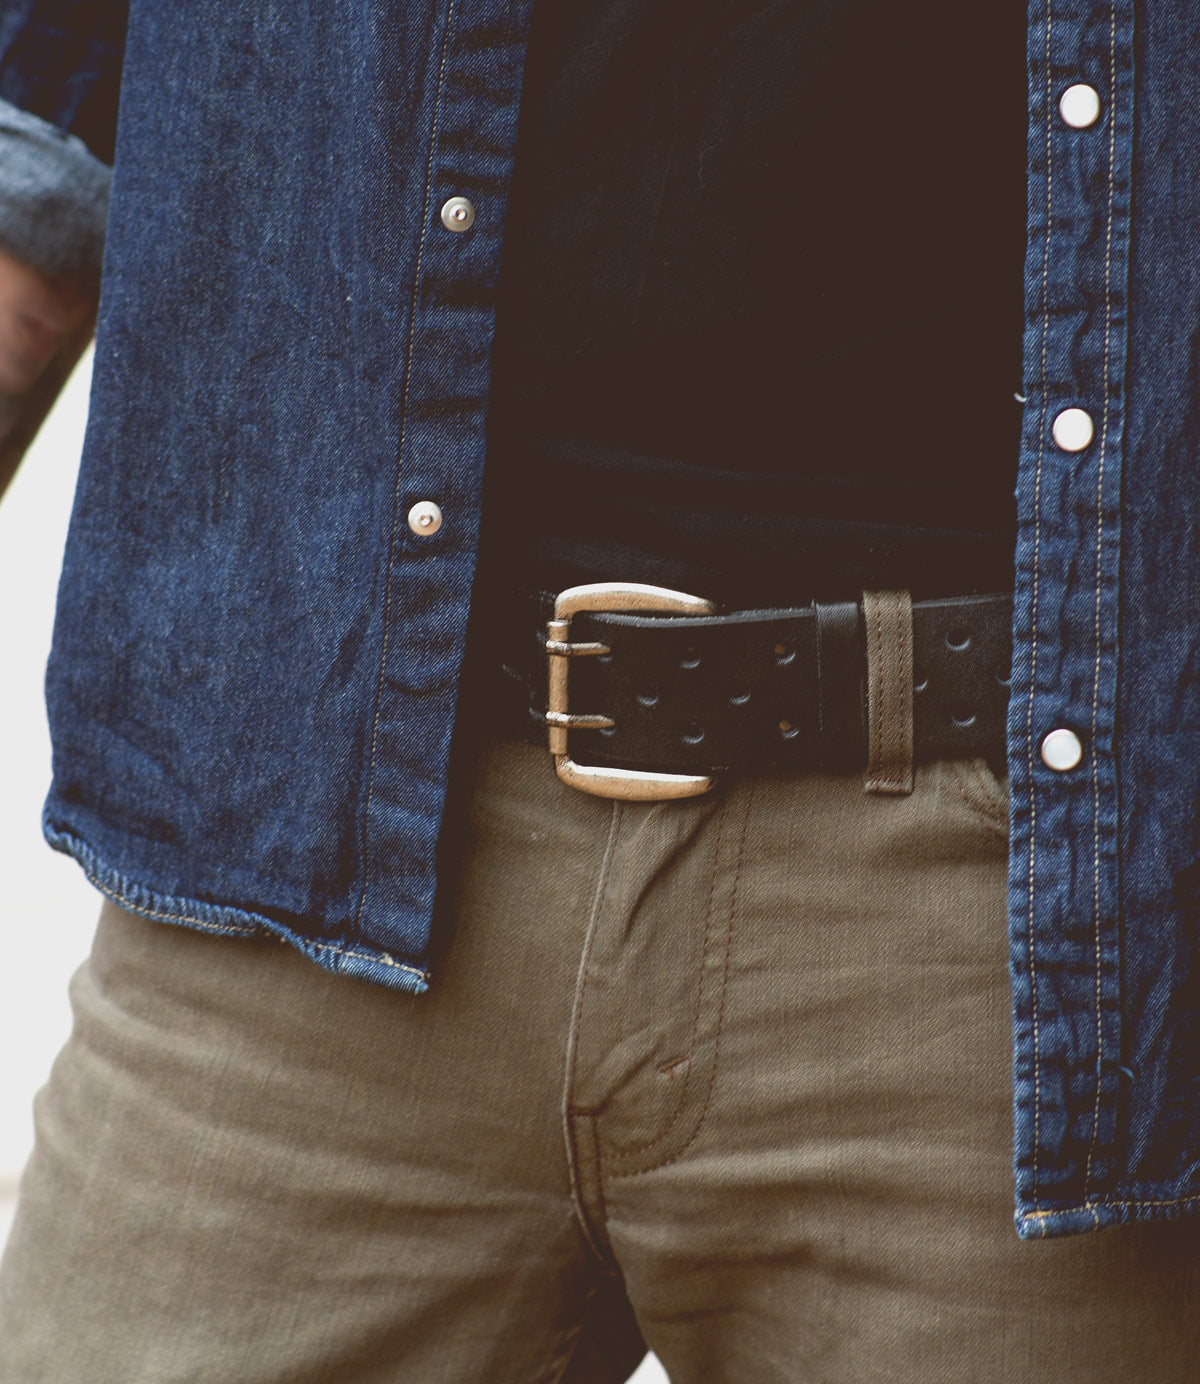 A person wearing a blue denim shirt, olive green pants, and a Bed Stu Mccoy belt with a silver buckle. The shirt is unbuttoned to reveal a black inner shirt, creating a look that seamlessly blends modern aesthetics with timeless design.